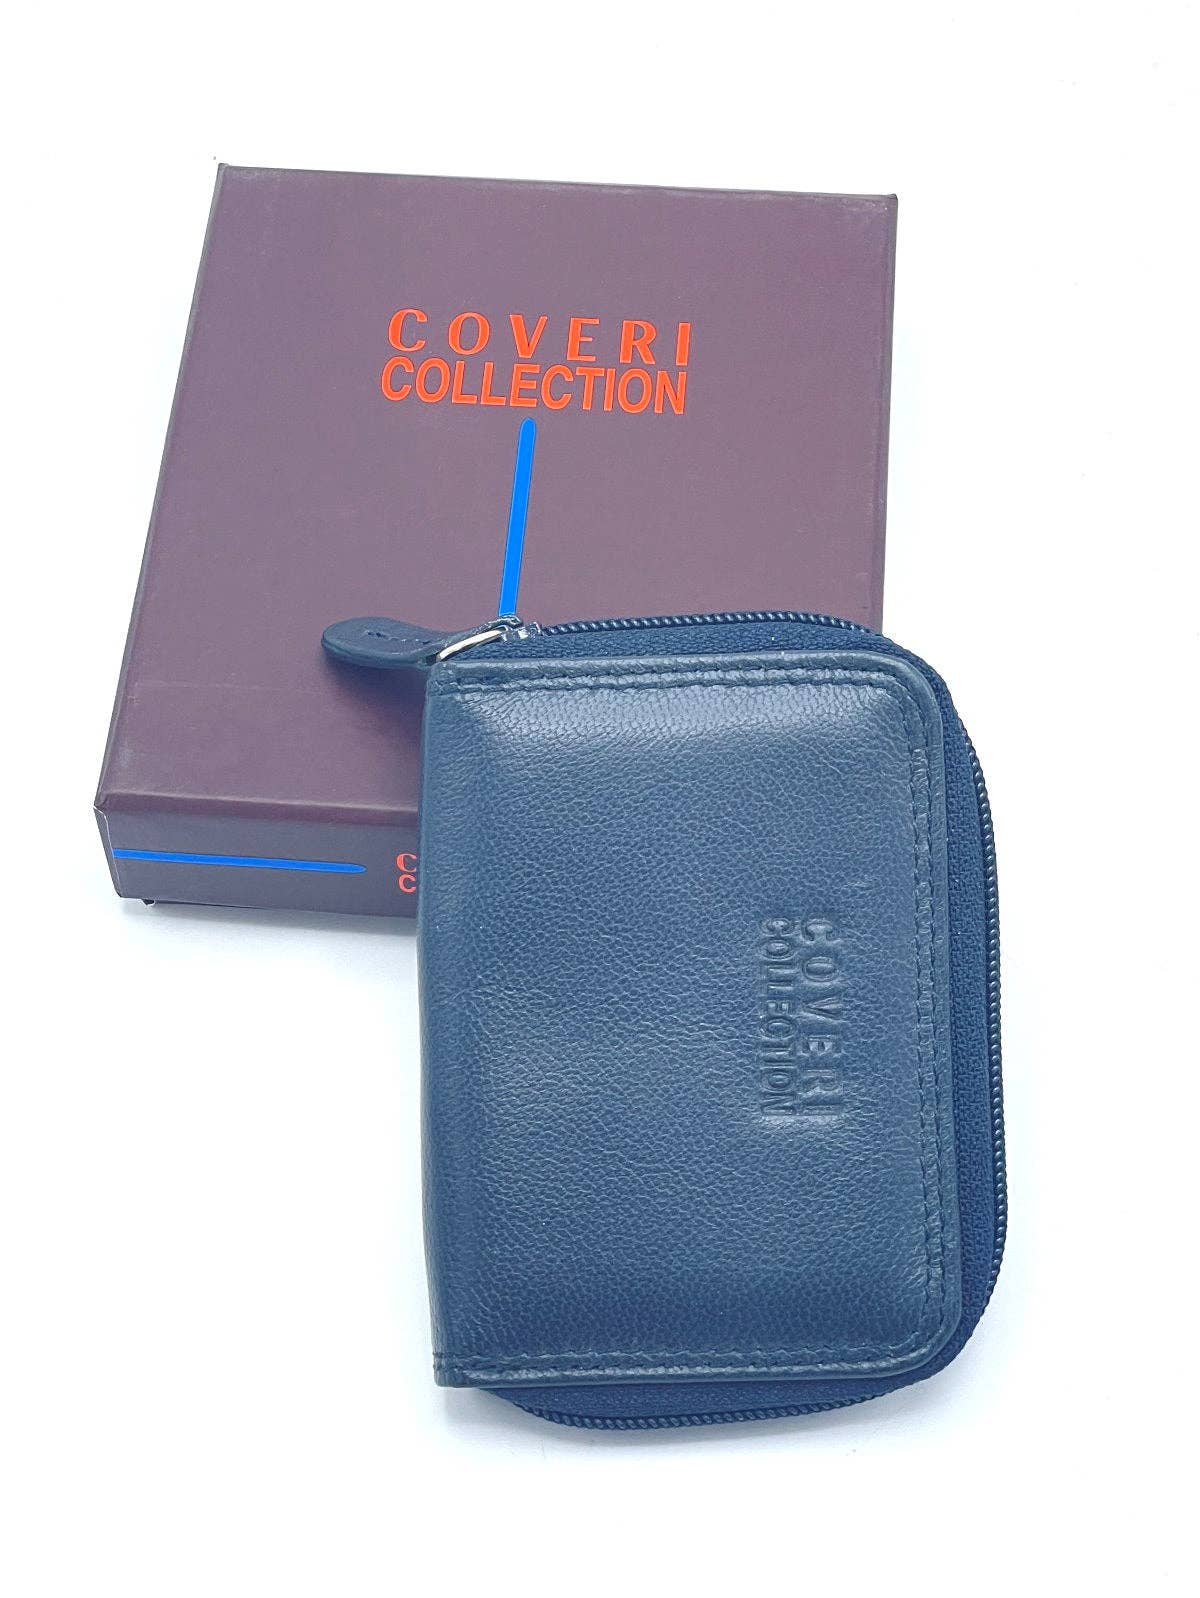 Leather card holder, Coveri Collection, art. 10711229.336